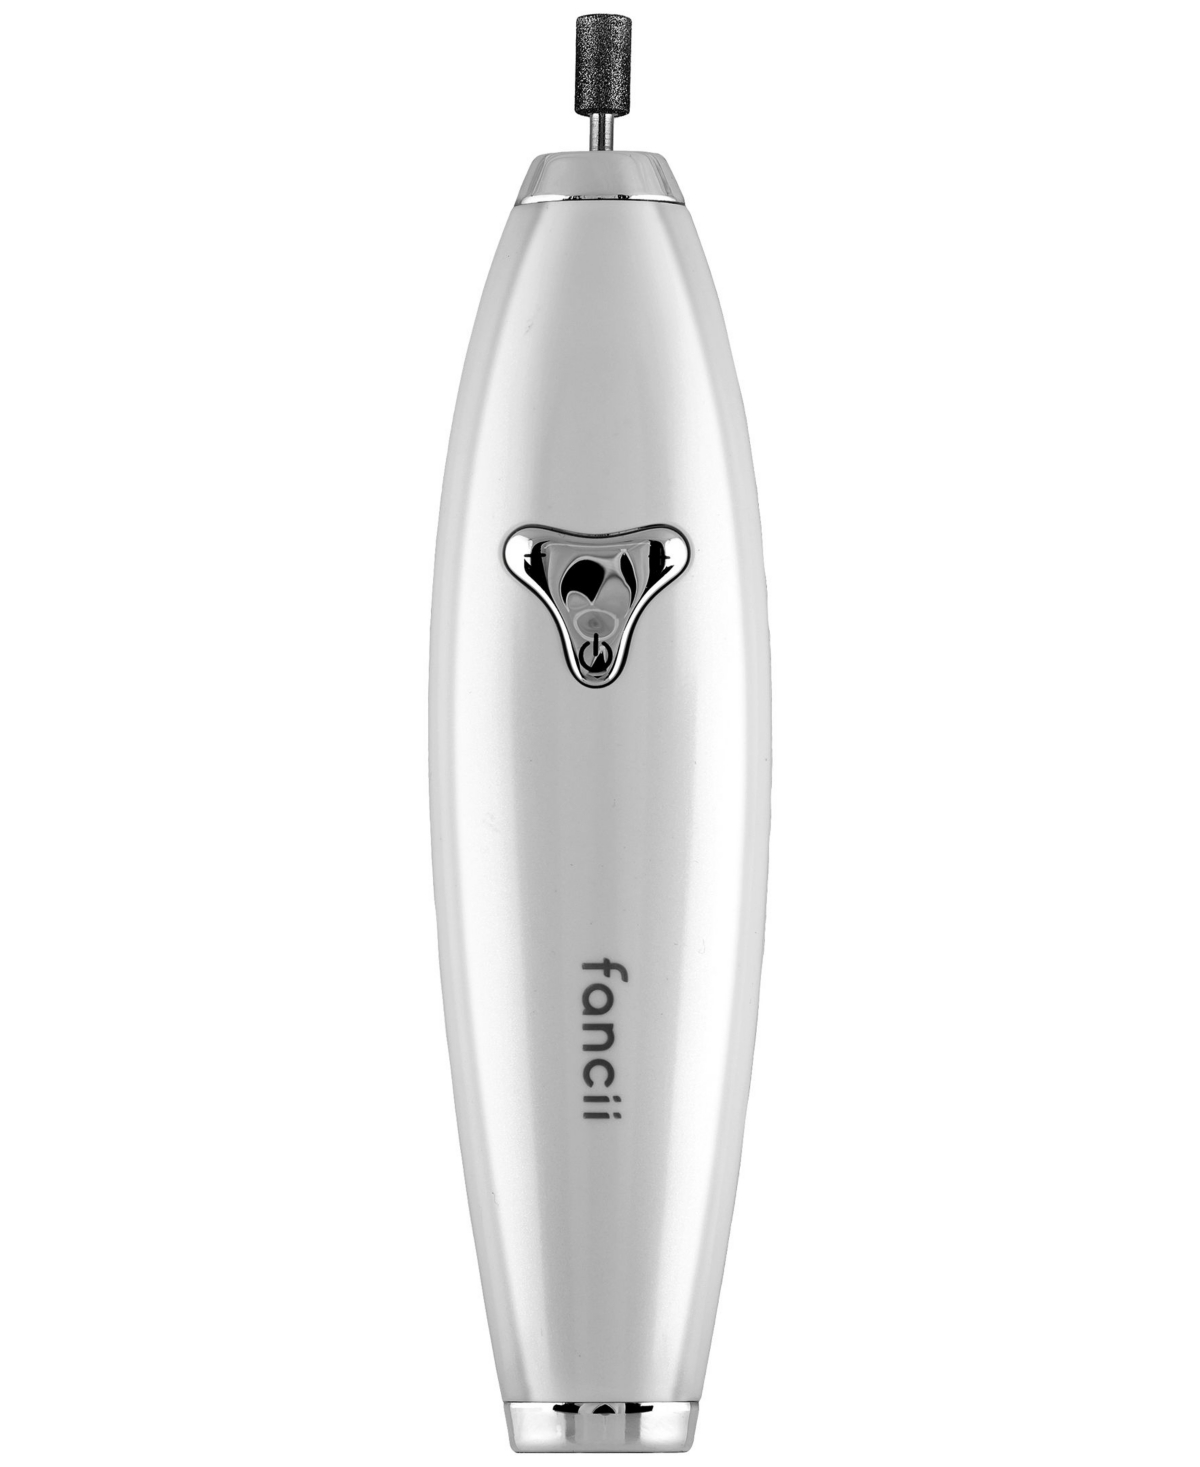 Lola Rechargeable 6-in-1 Manicure Set - White